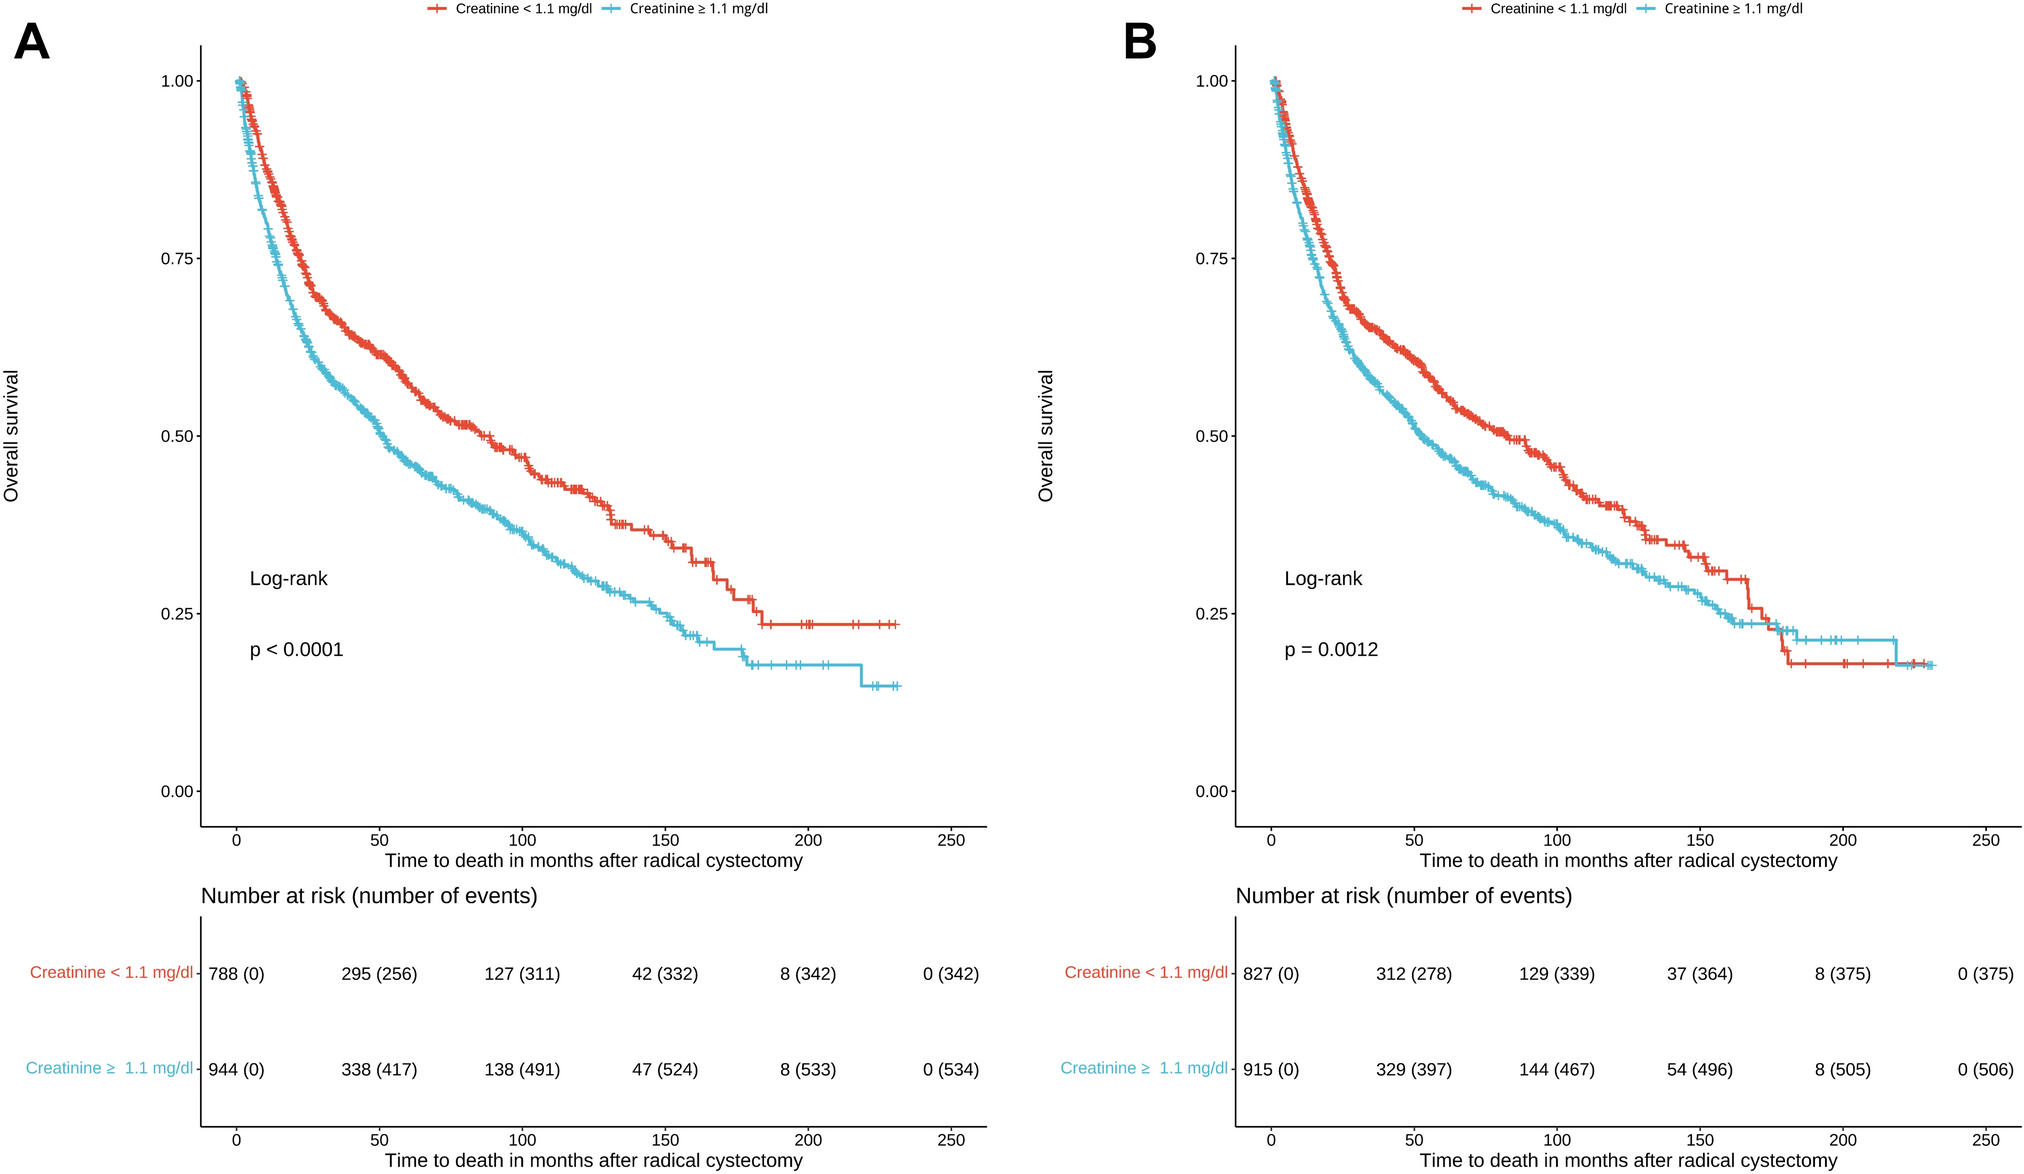 The impact of perioperative risk factors on long-term survival after radical cystectomy: a prospective, high-volume cohort study